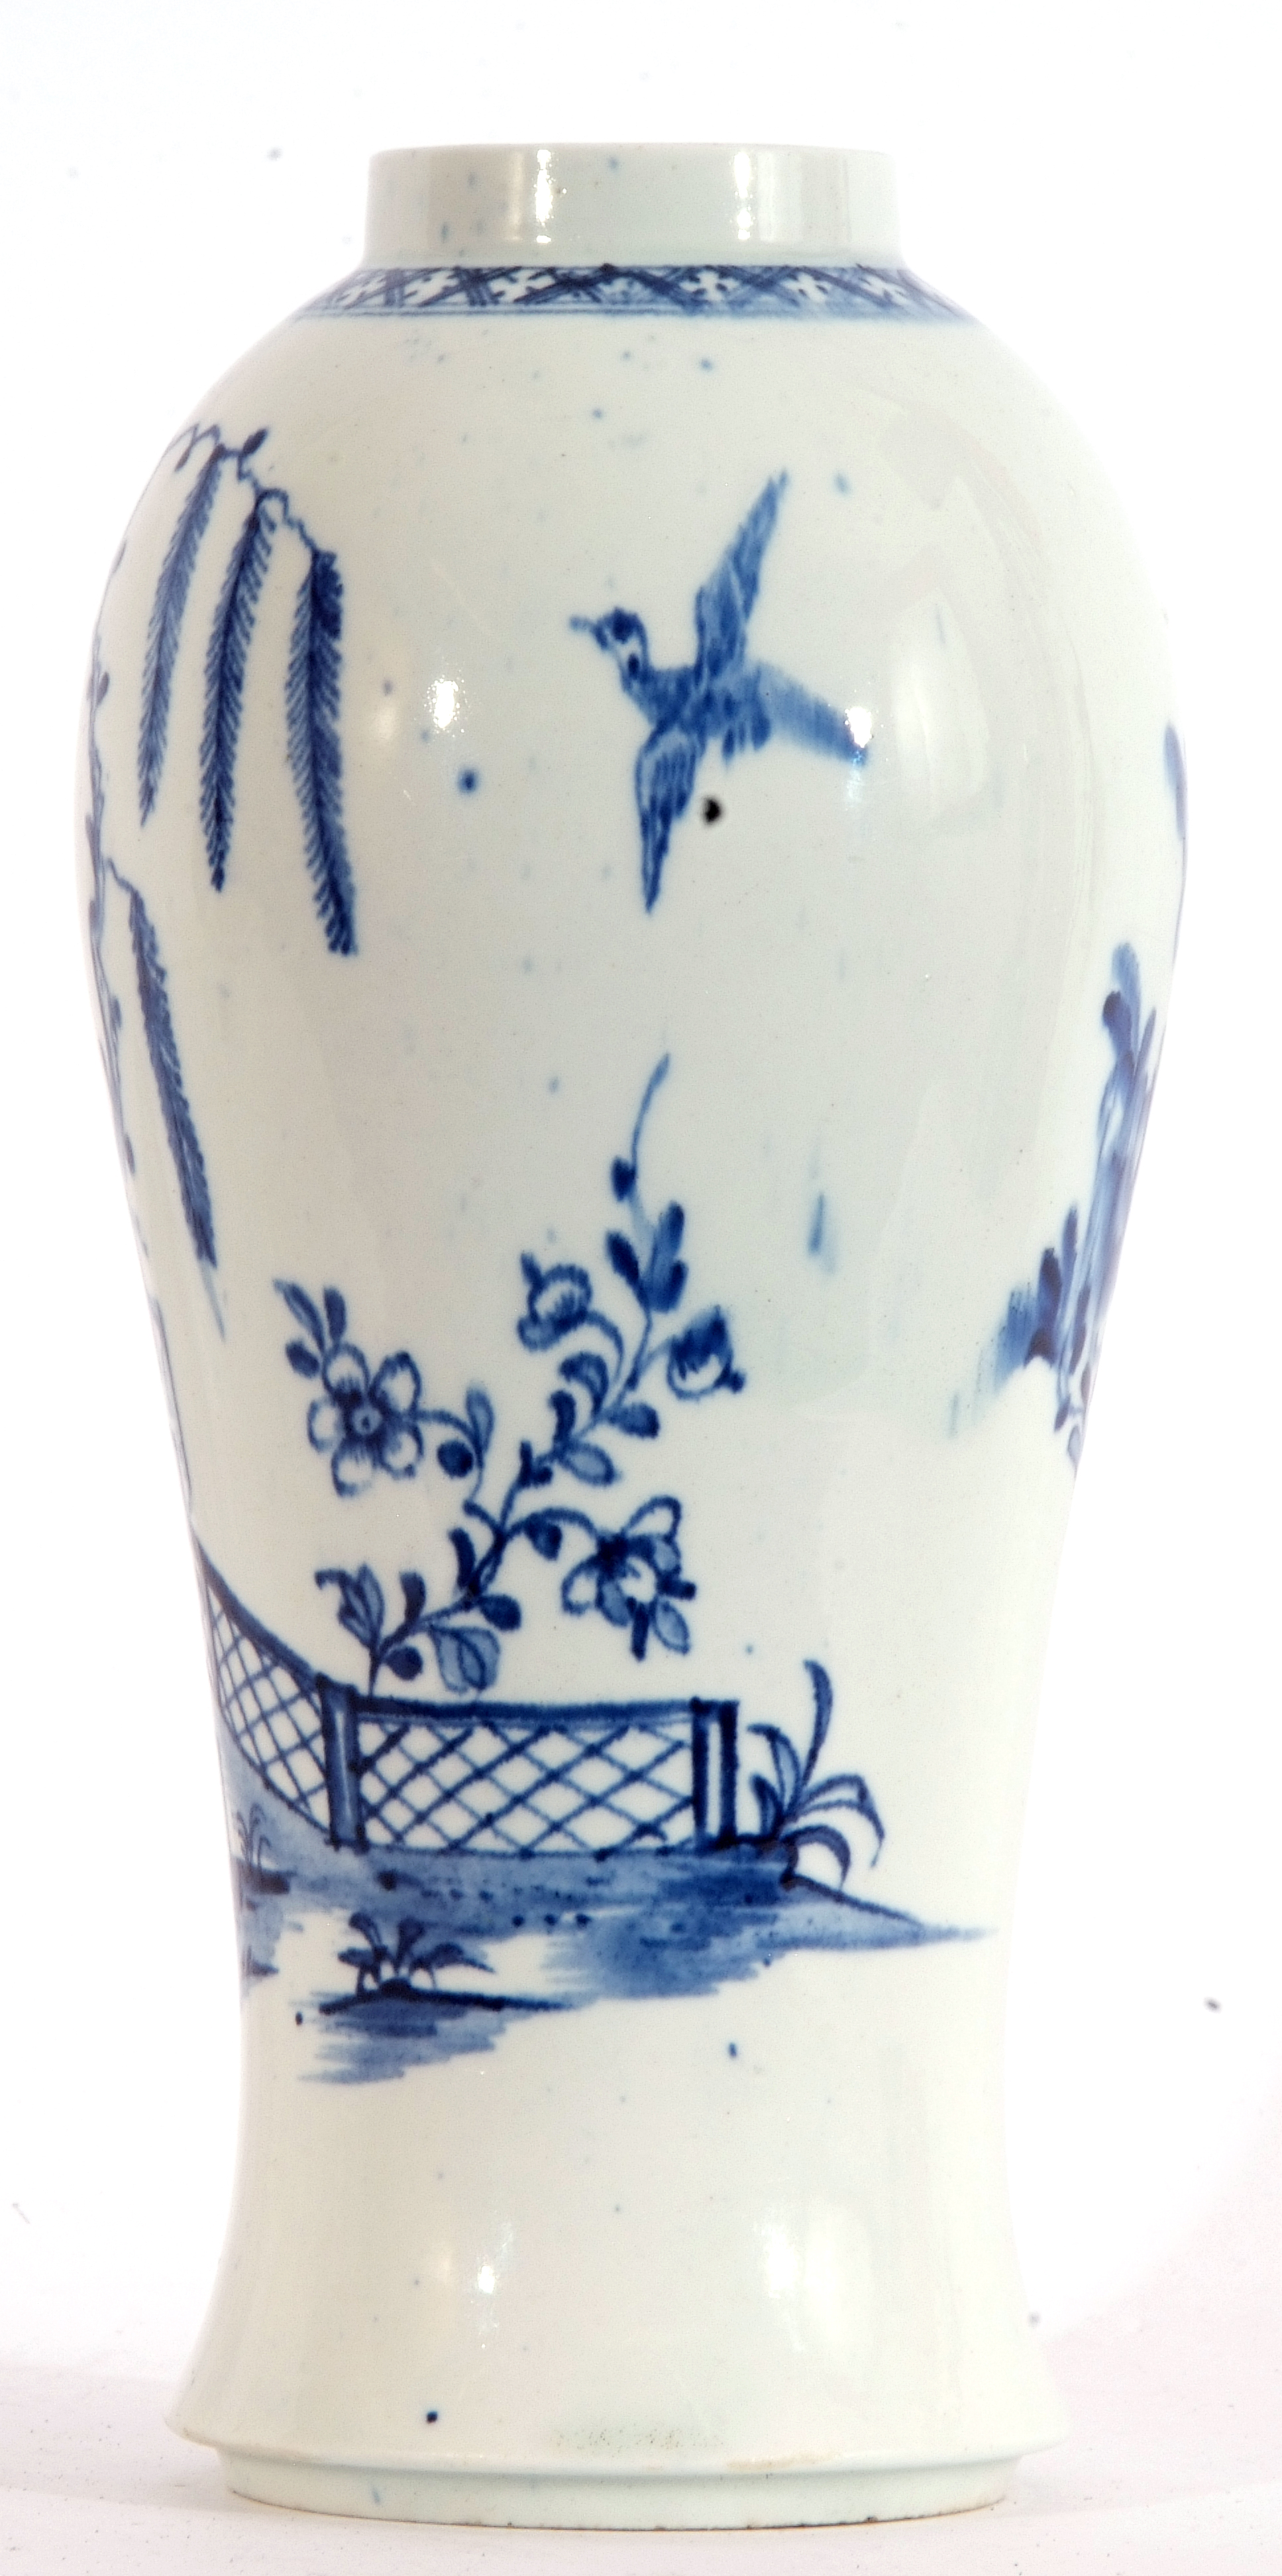 Lowestoft porcelain baluster vase decorated in underglaze blue with a fence and trees and floral - Image 3 of 7